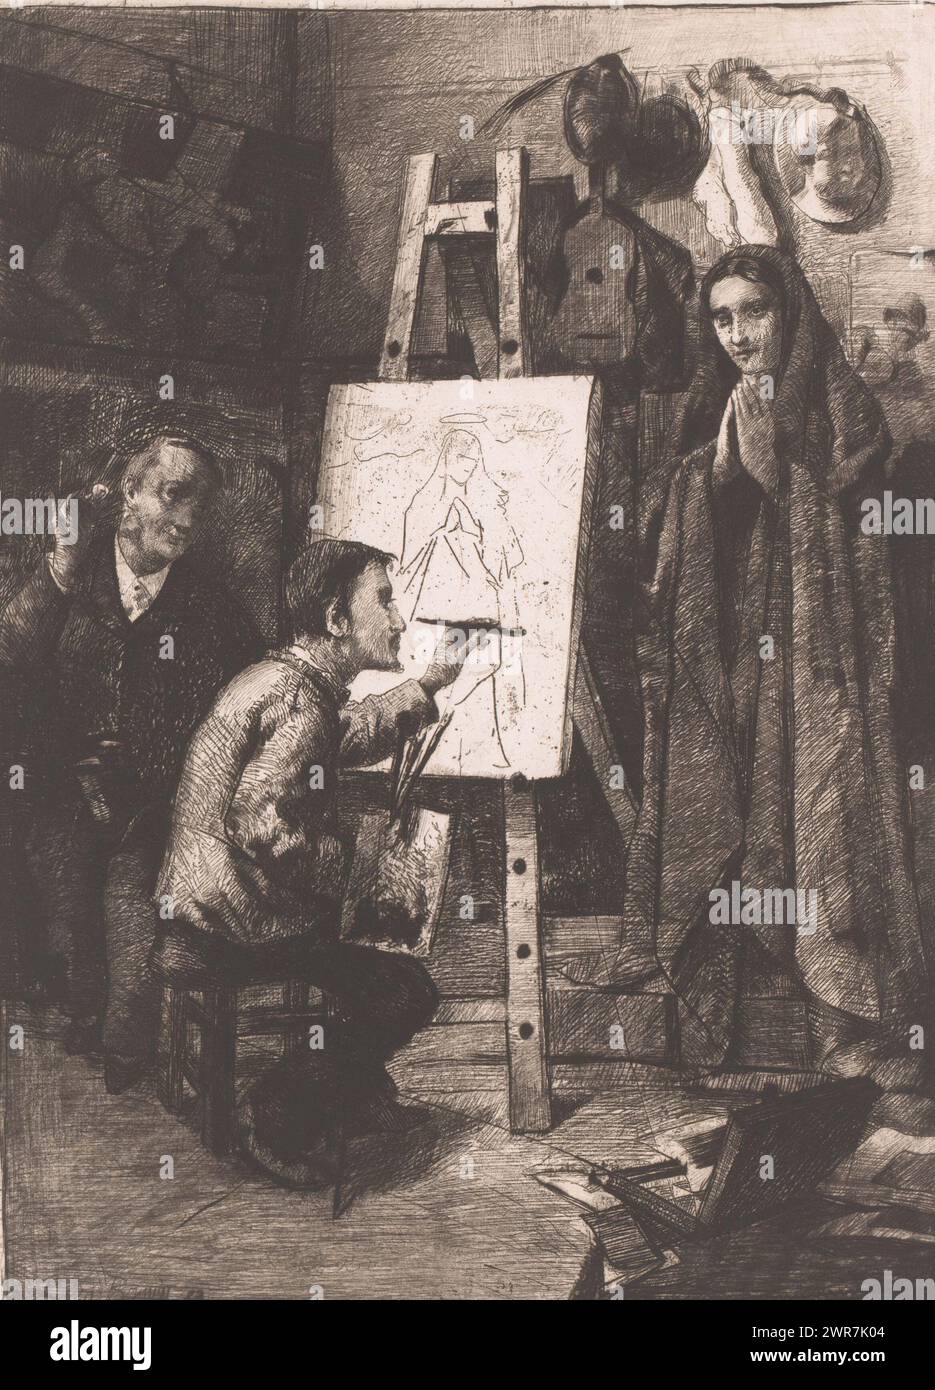 Painter, his model and an art lover in the studio, L'artiste, son modèle et l'amateur (title on object), print maker: Léon Brunin, (signed by artist), 1883, paper, etching, drypoint, height 291 mm × width 221 mm, print Stock Photo